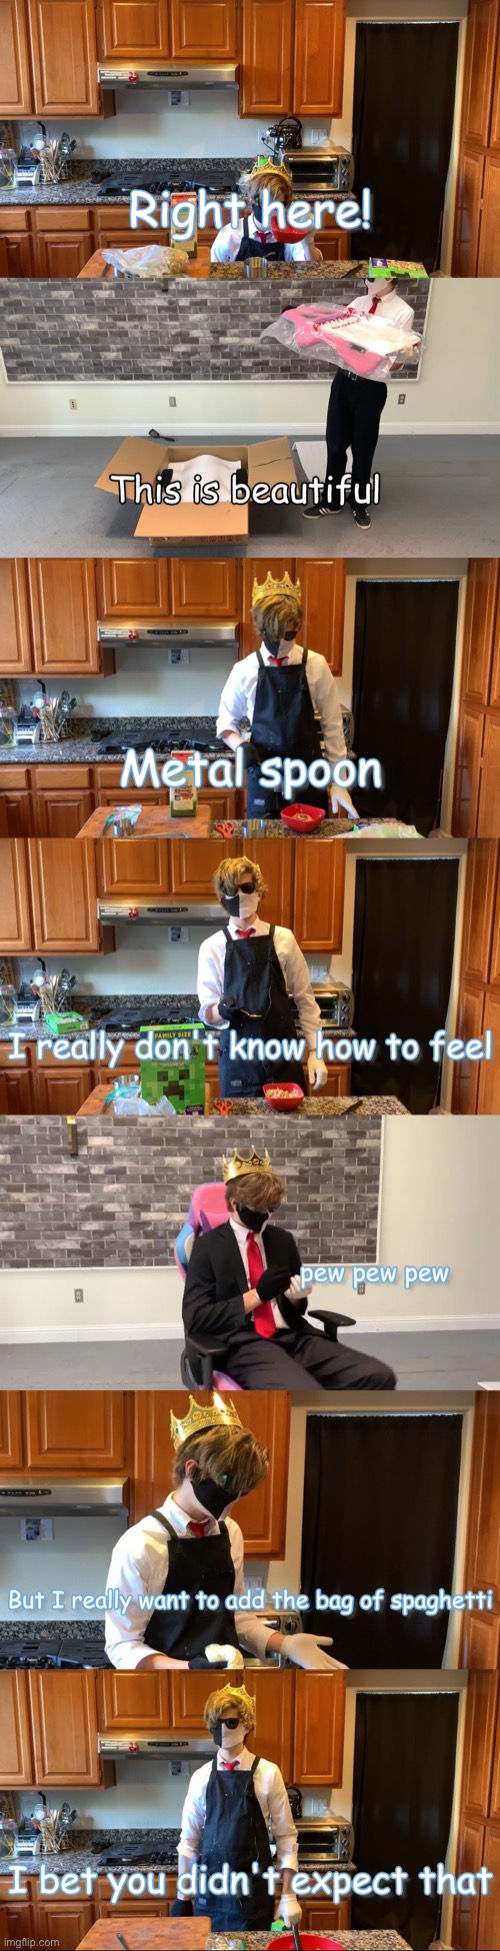 Me? Ranboo obsession? I mean- yeah a little bit- | image tagged in ranboo right here,this is beautiful,metal spoon,ranboo,pew pew pew,s p a g h e t t i | made w/ Imgflip meme maker